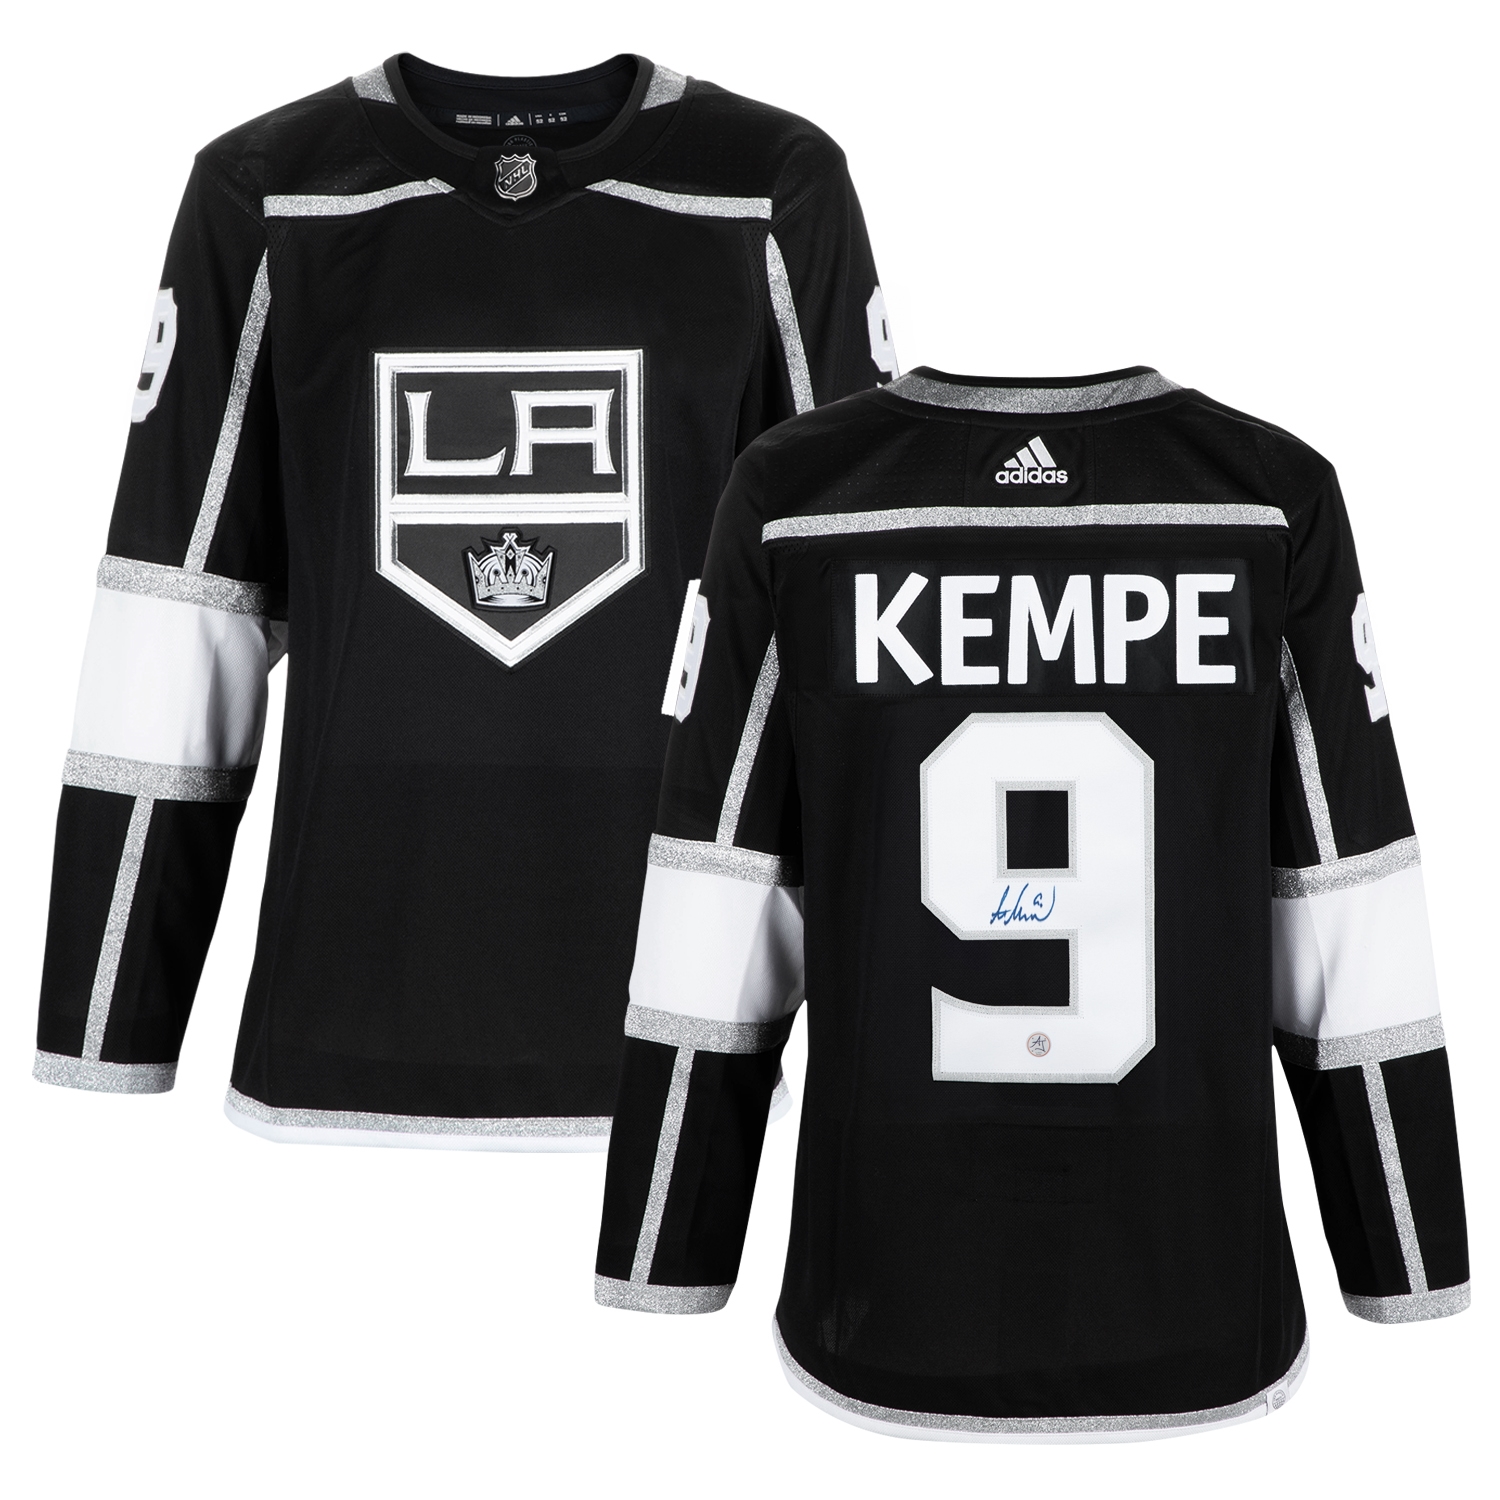 Adrian Kempe Autographed Los Angeles Kings adidas Jersey